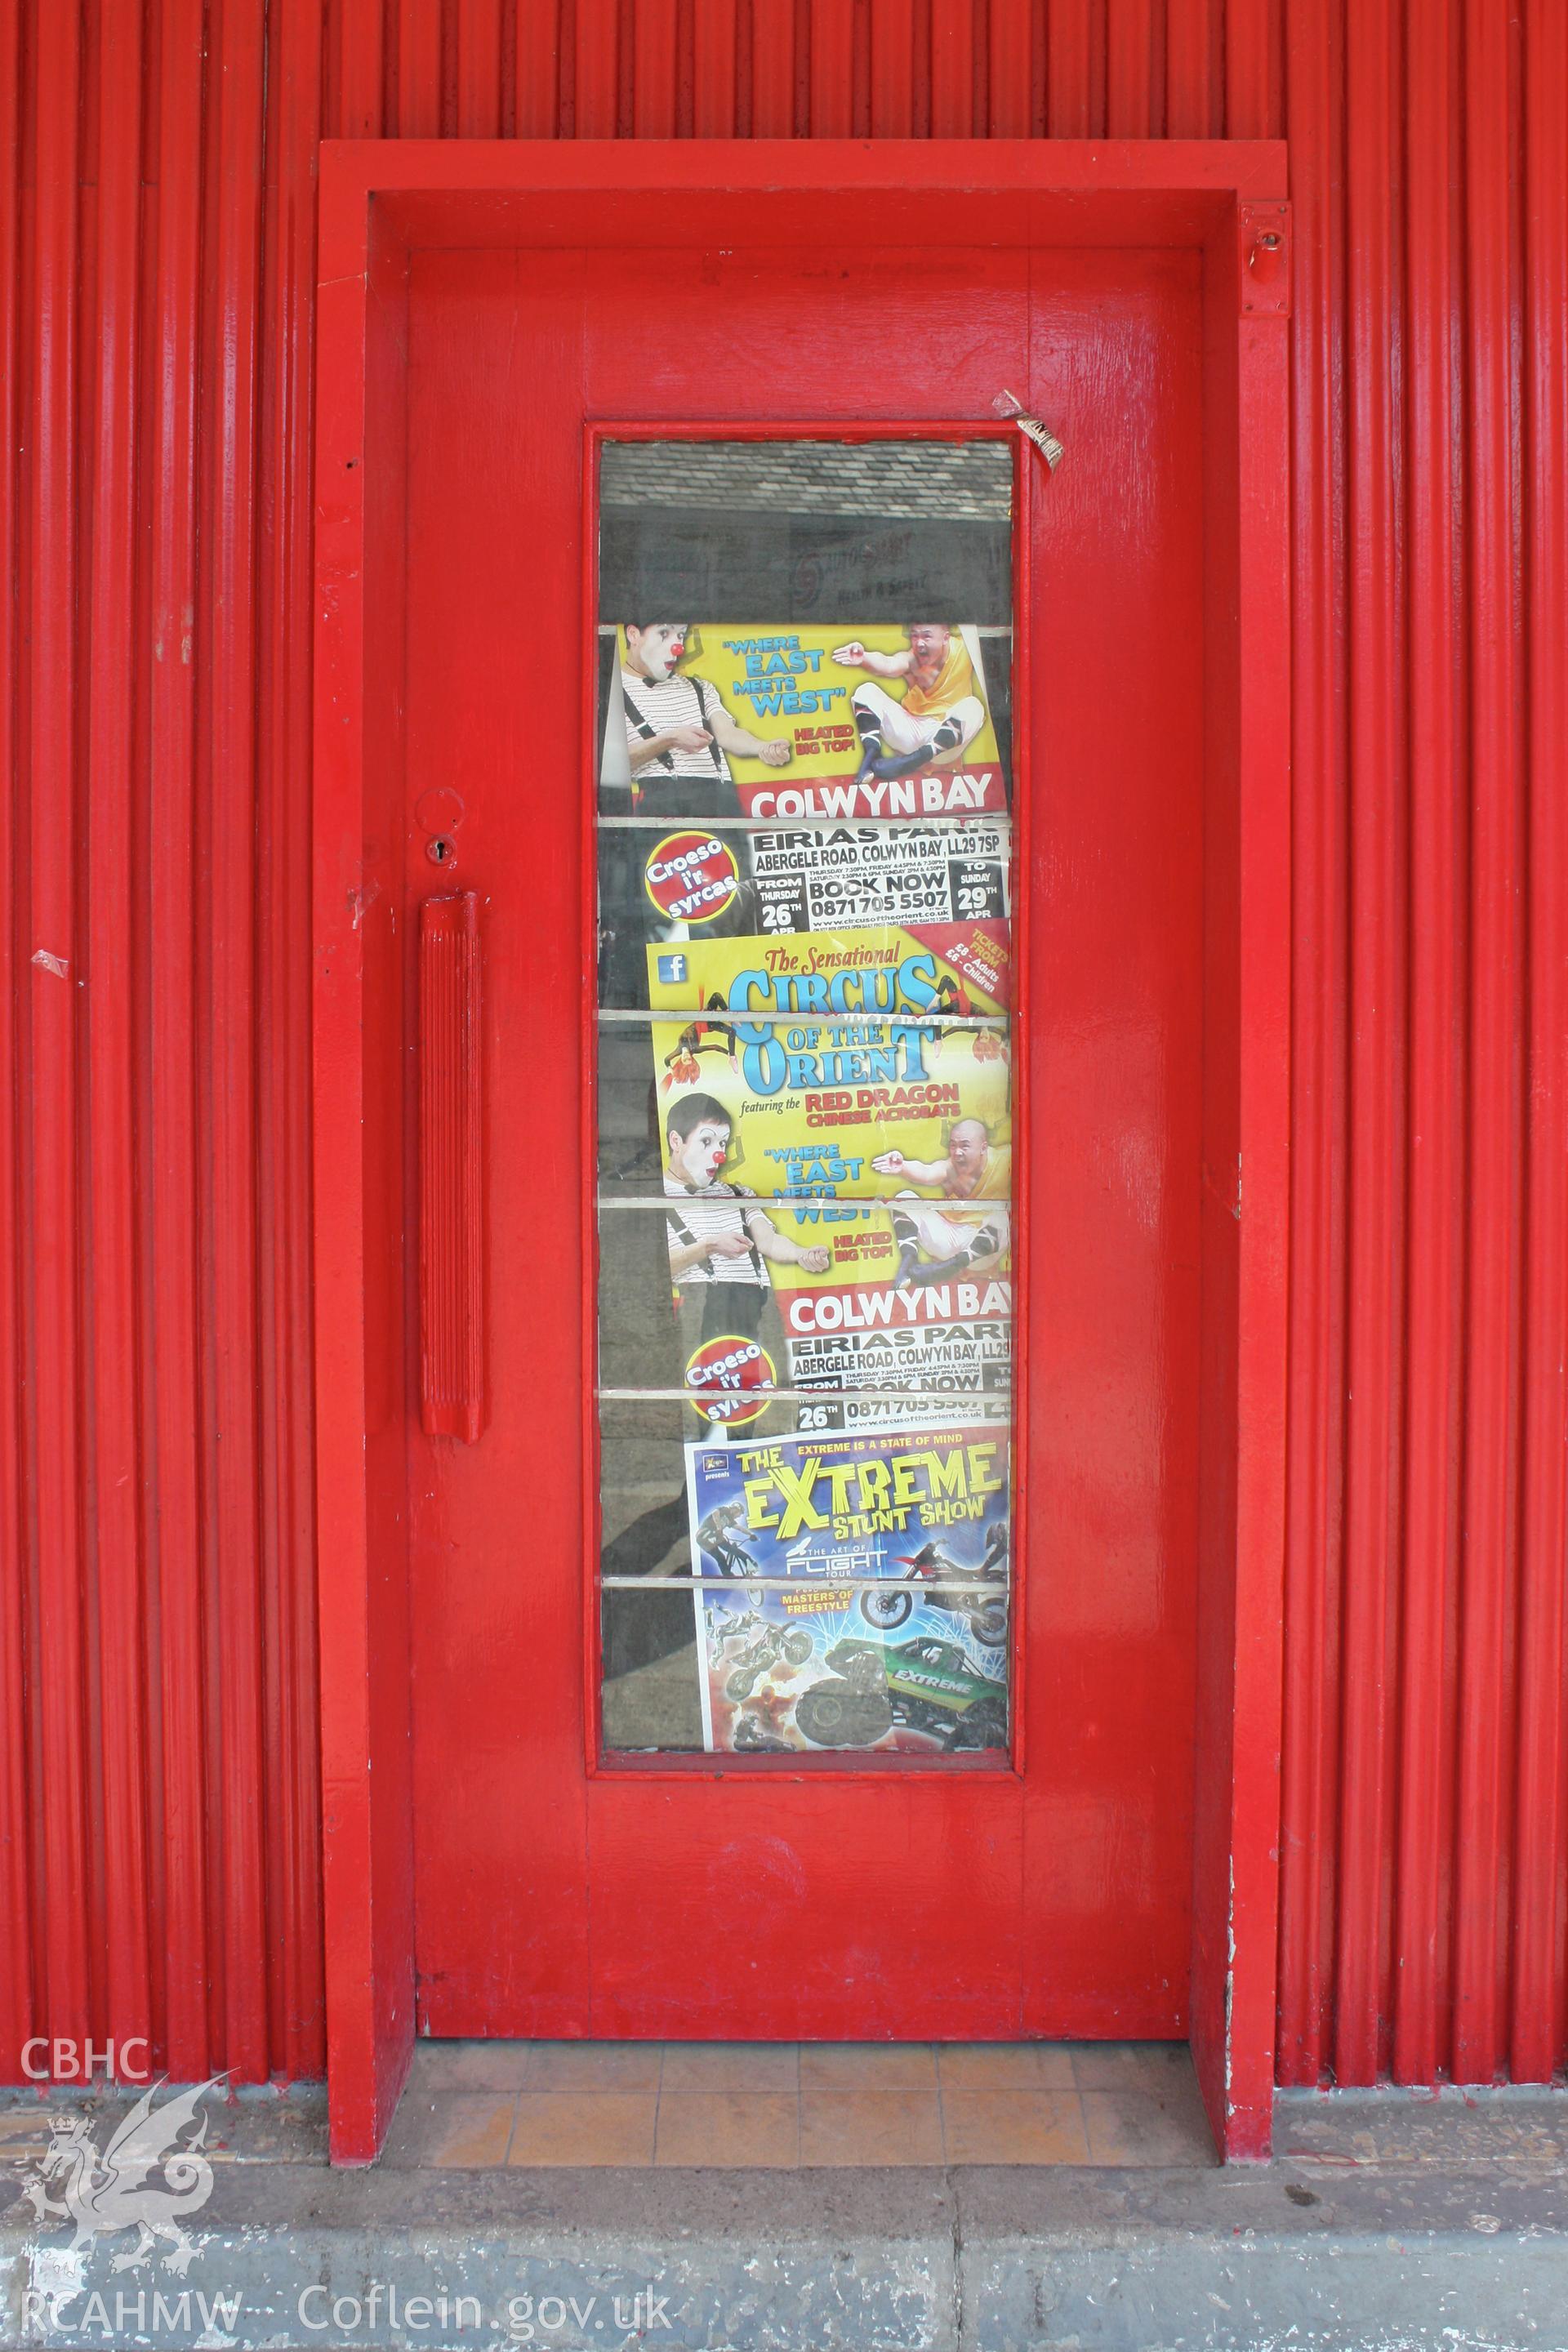 Colour photograph showing exterior of entrance door to the petrol station on Rhyl Road, Denbigh. Photographic survey conducted by Sue Fielding on 26th August 2011.